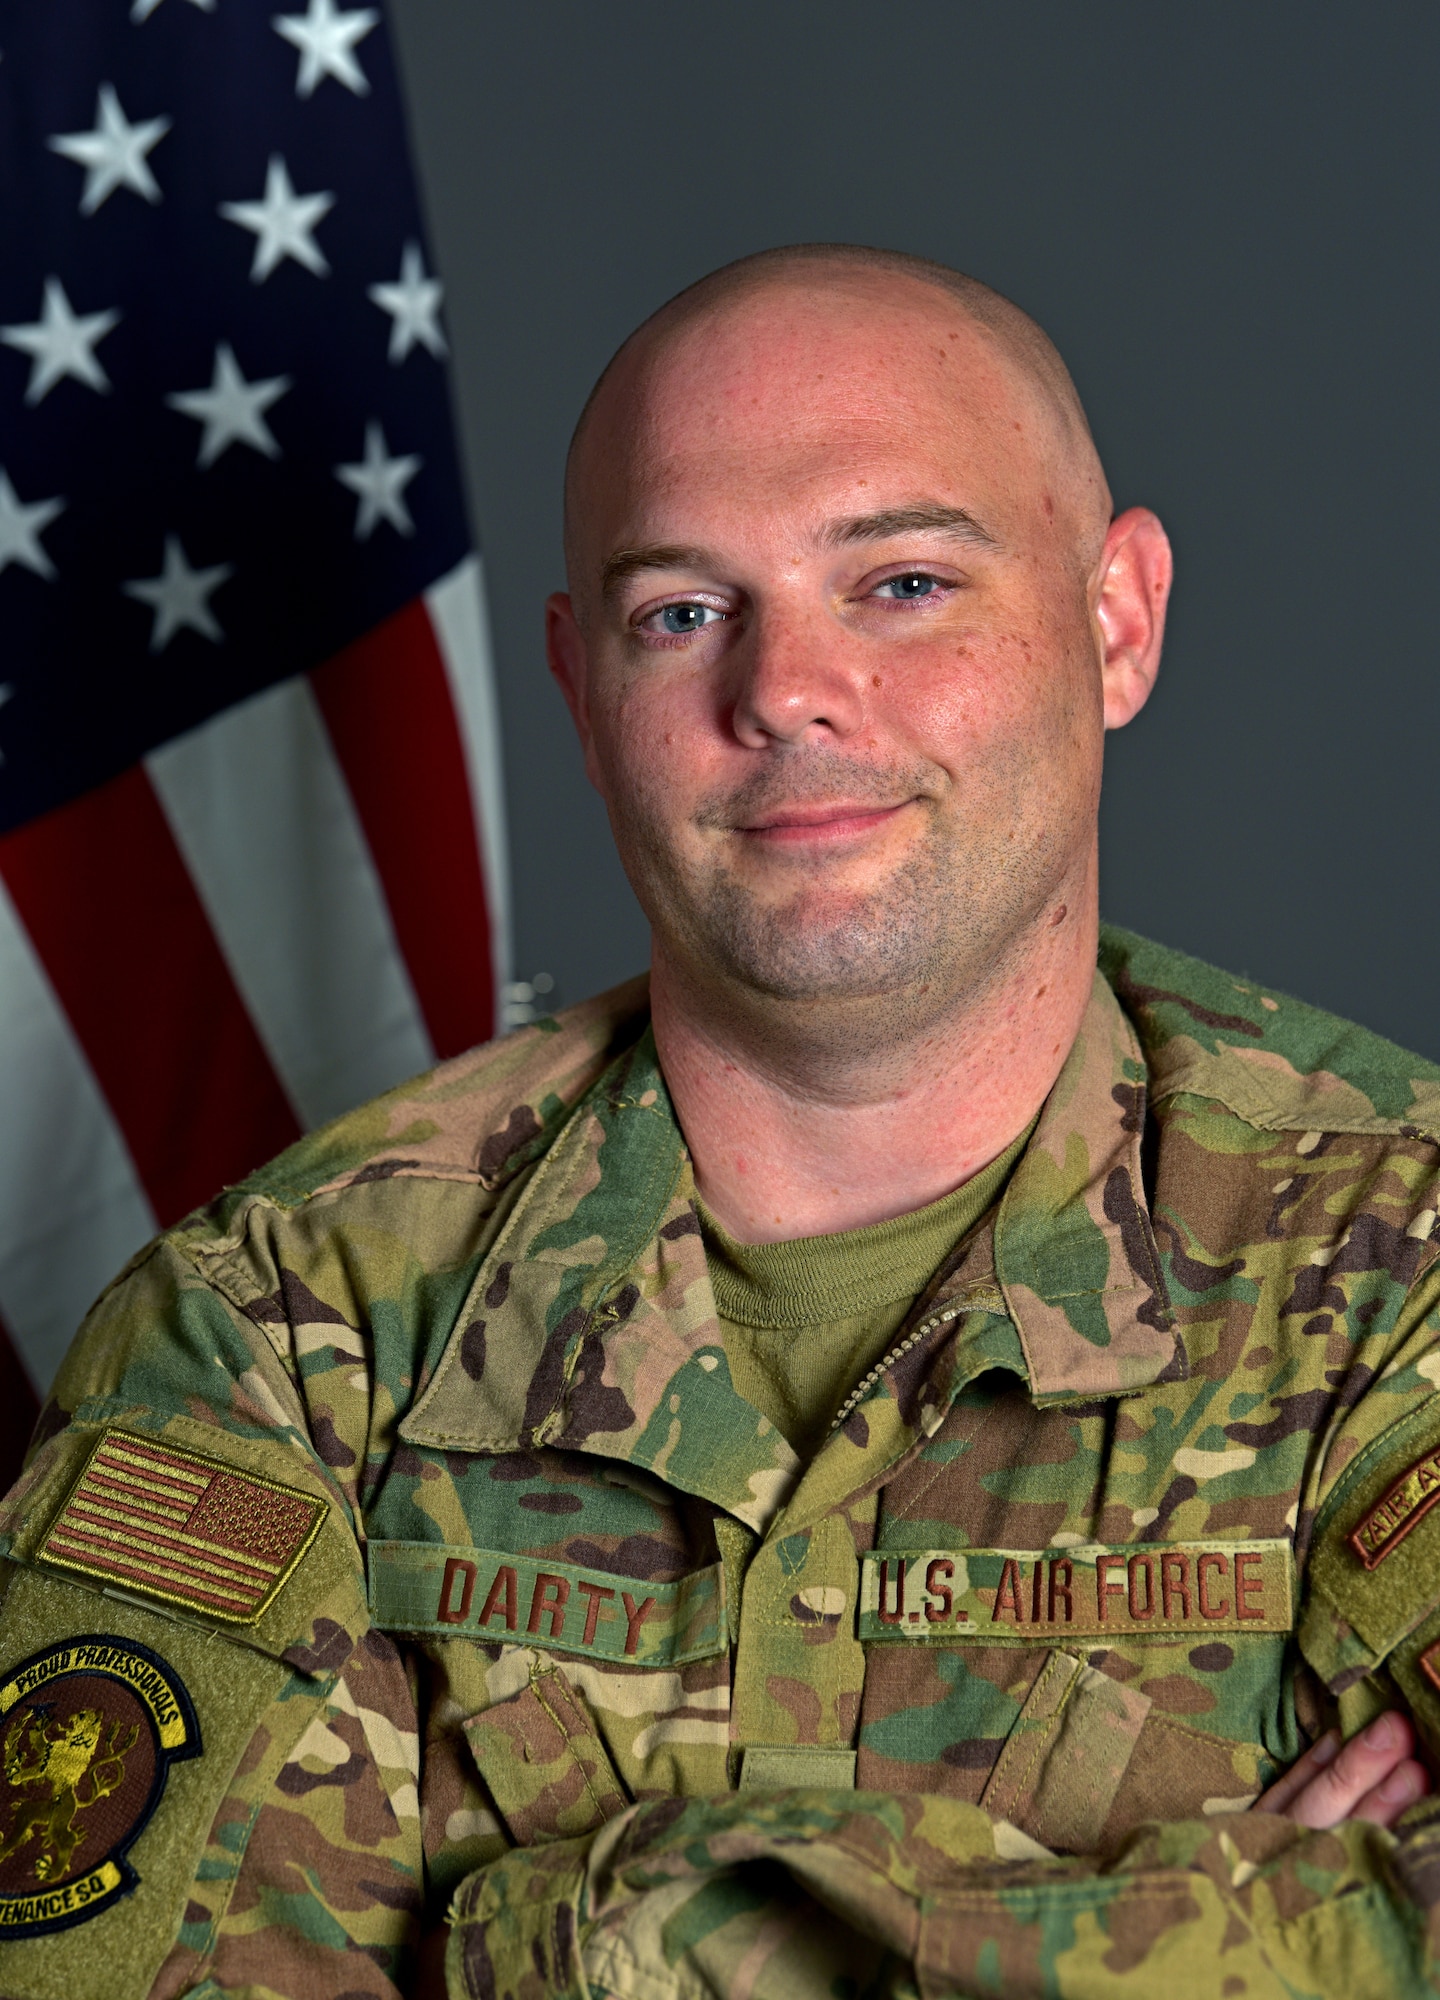 U.S. Air Force Maj. Aaron Darty, 100th Maintenance Squadron operations officer, poses for a photo at RAF Mildenhall, England, July 9, 2019. Darty was recently awarded the Bronze Star Medal for meritorious achievement as operations officer and maintenance advisor in support of Operation Freedom Sentinel while deployed to Kandahar Airfield, Afghanistan. (U.S. Air Force photo by Airman 1st Class Brandon Esau)